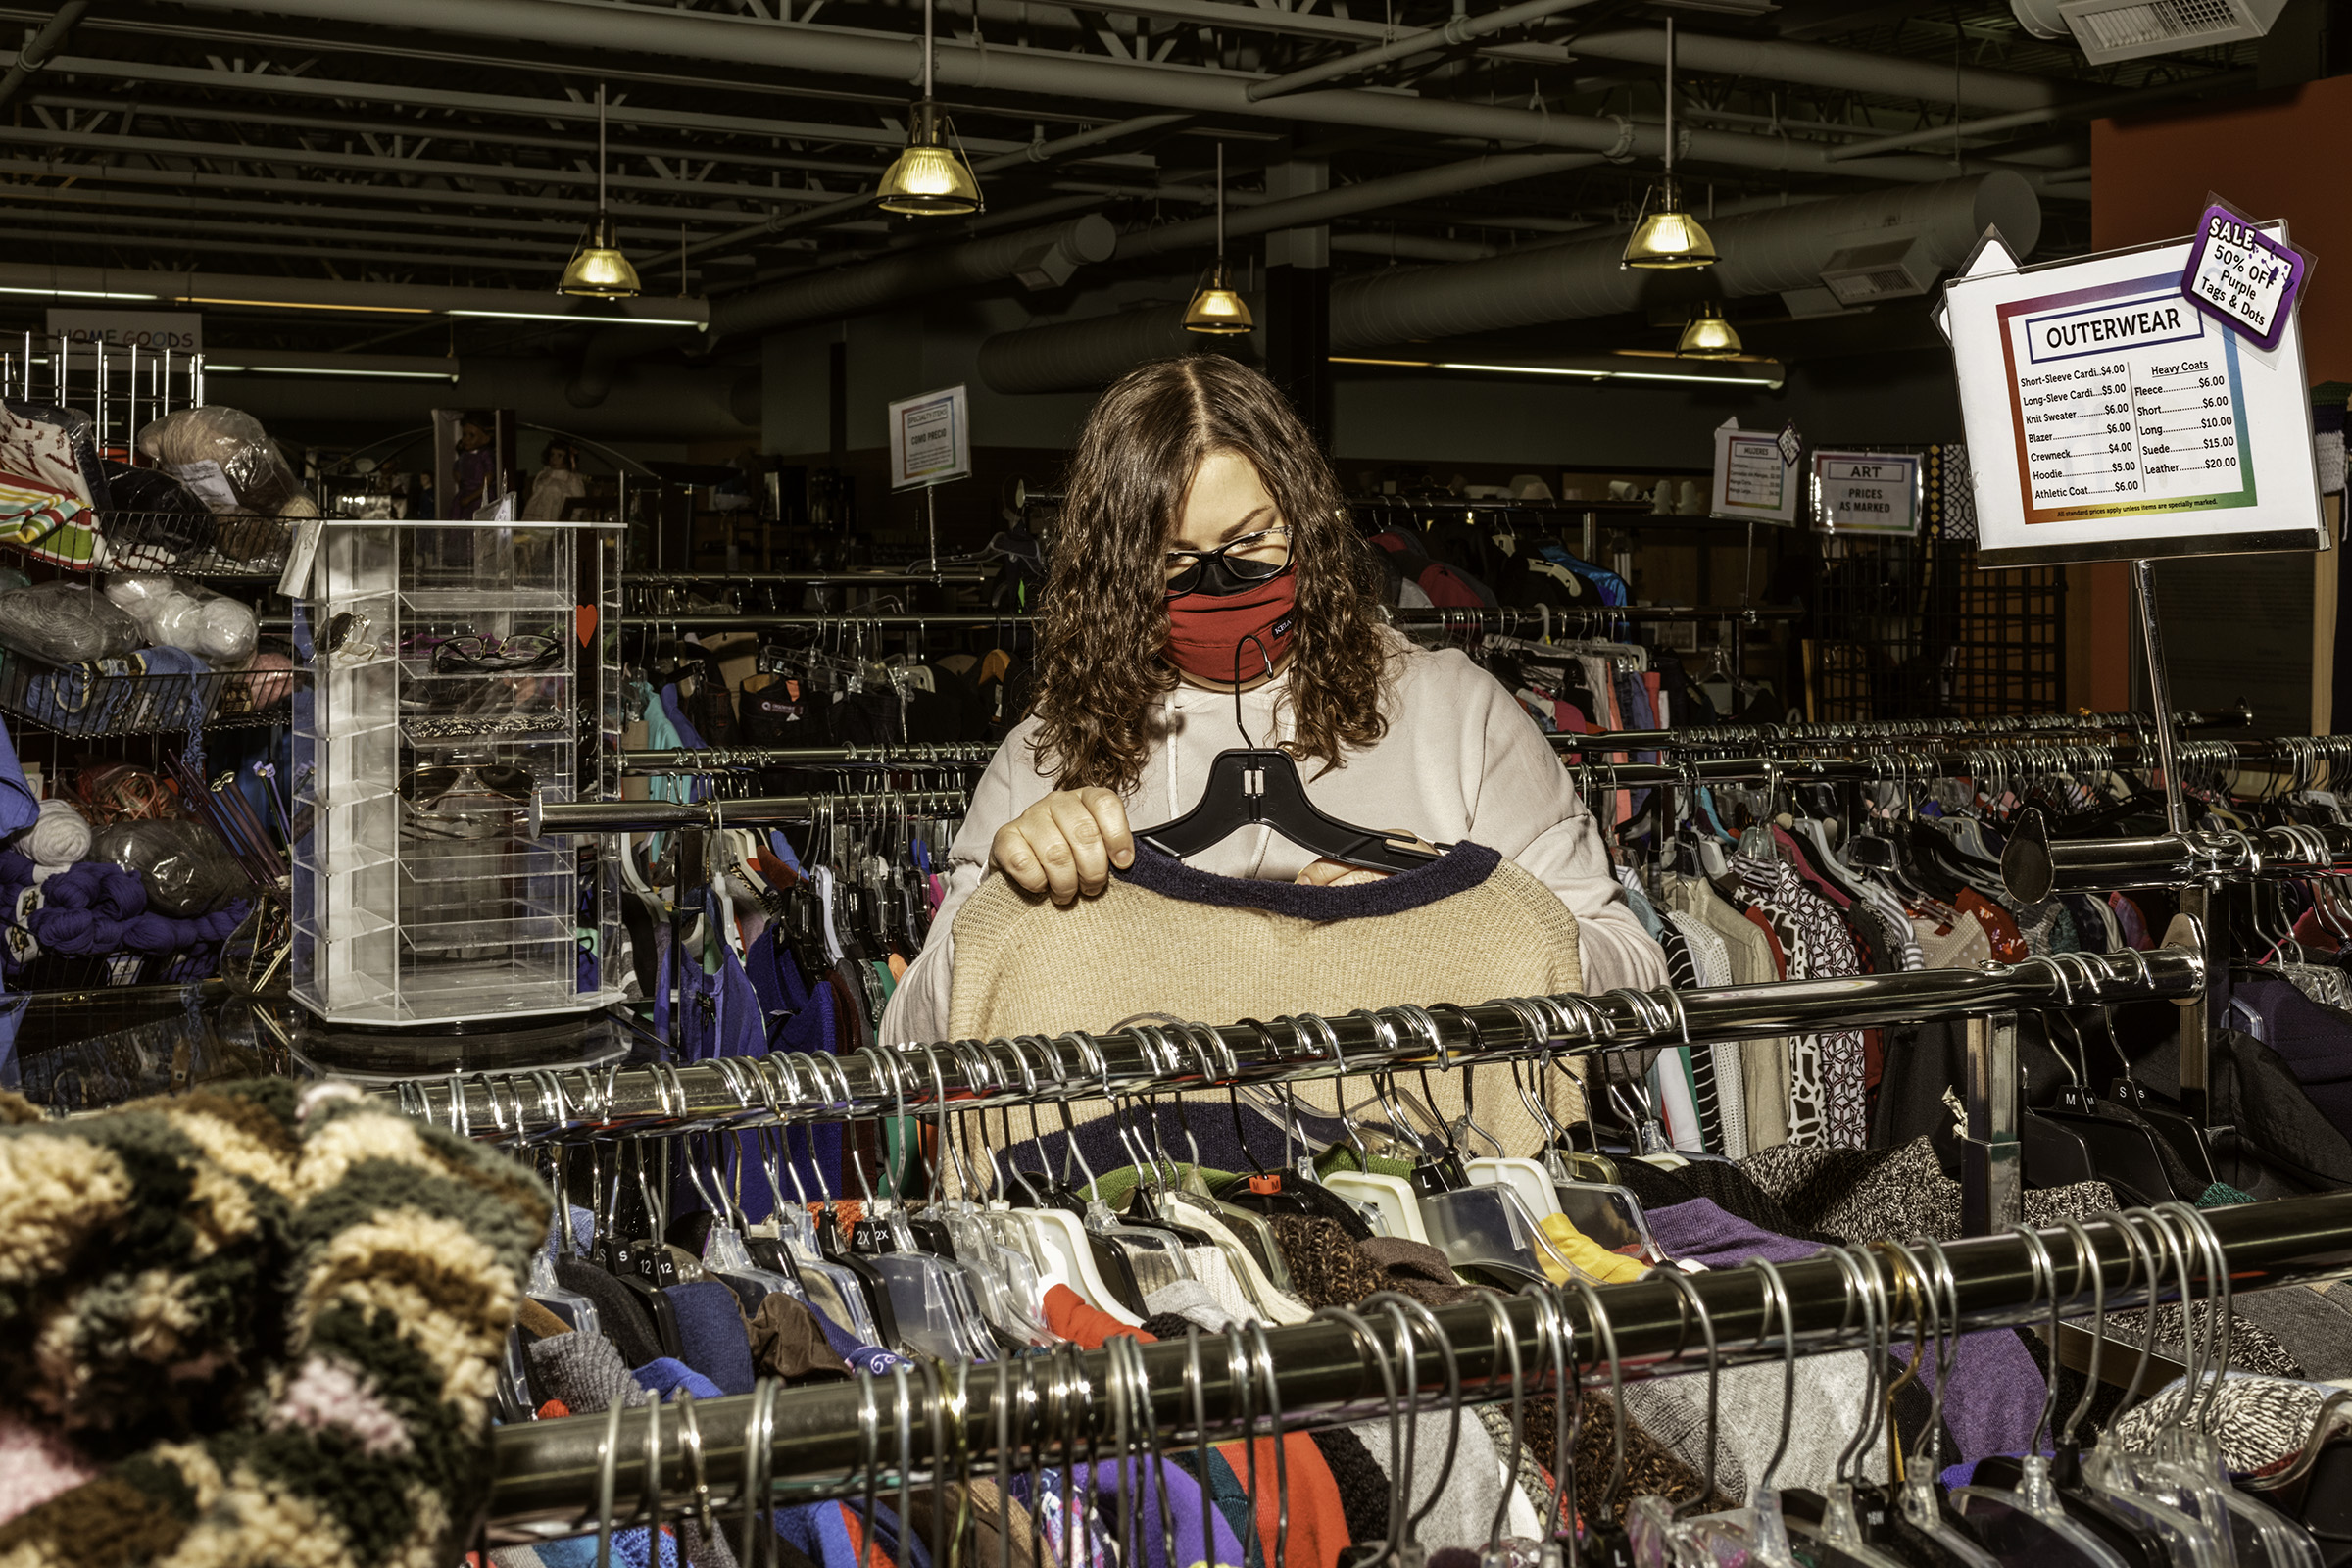 Sarah Urquhart browses the aisles at CommunityWorx Thrift Shop. Sarah tries to avoid buying new items and typically shops for herself and friends at thrift stores throughout the area. (Jeremy M. Lange for TIME)